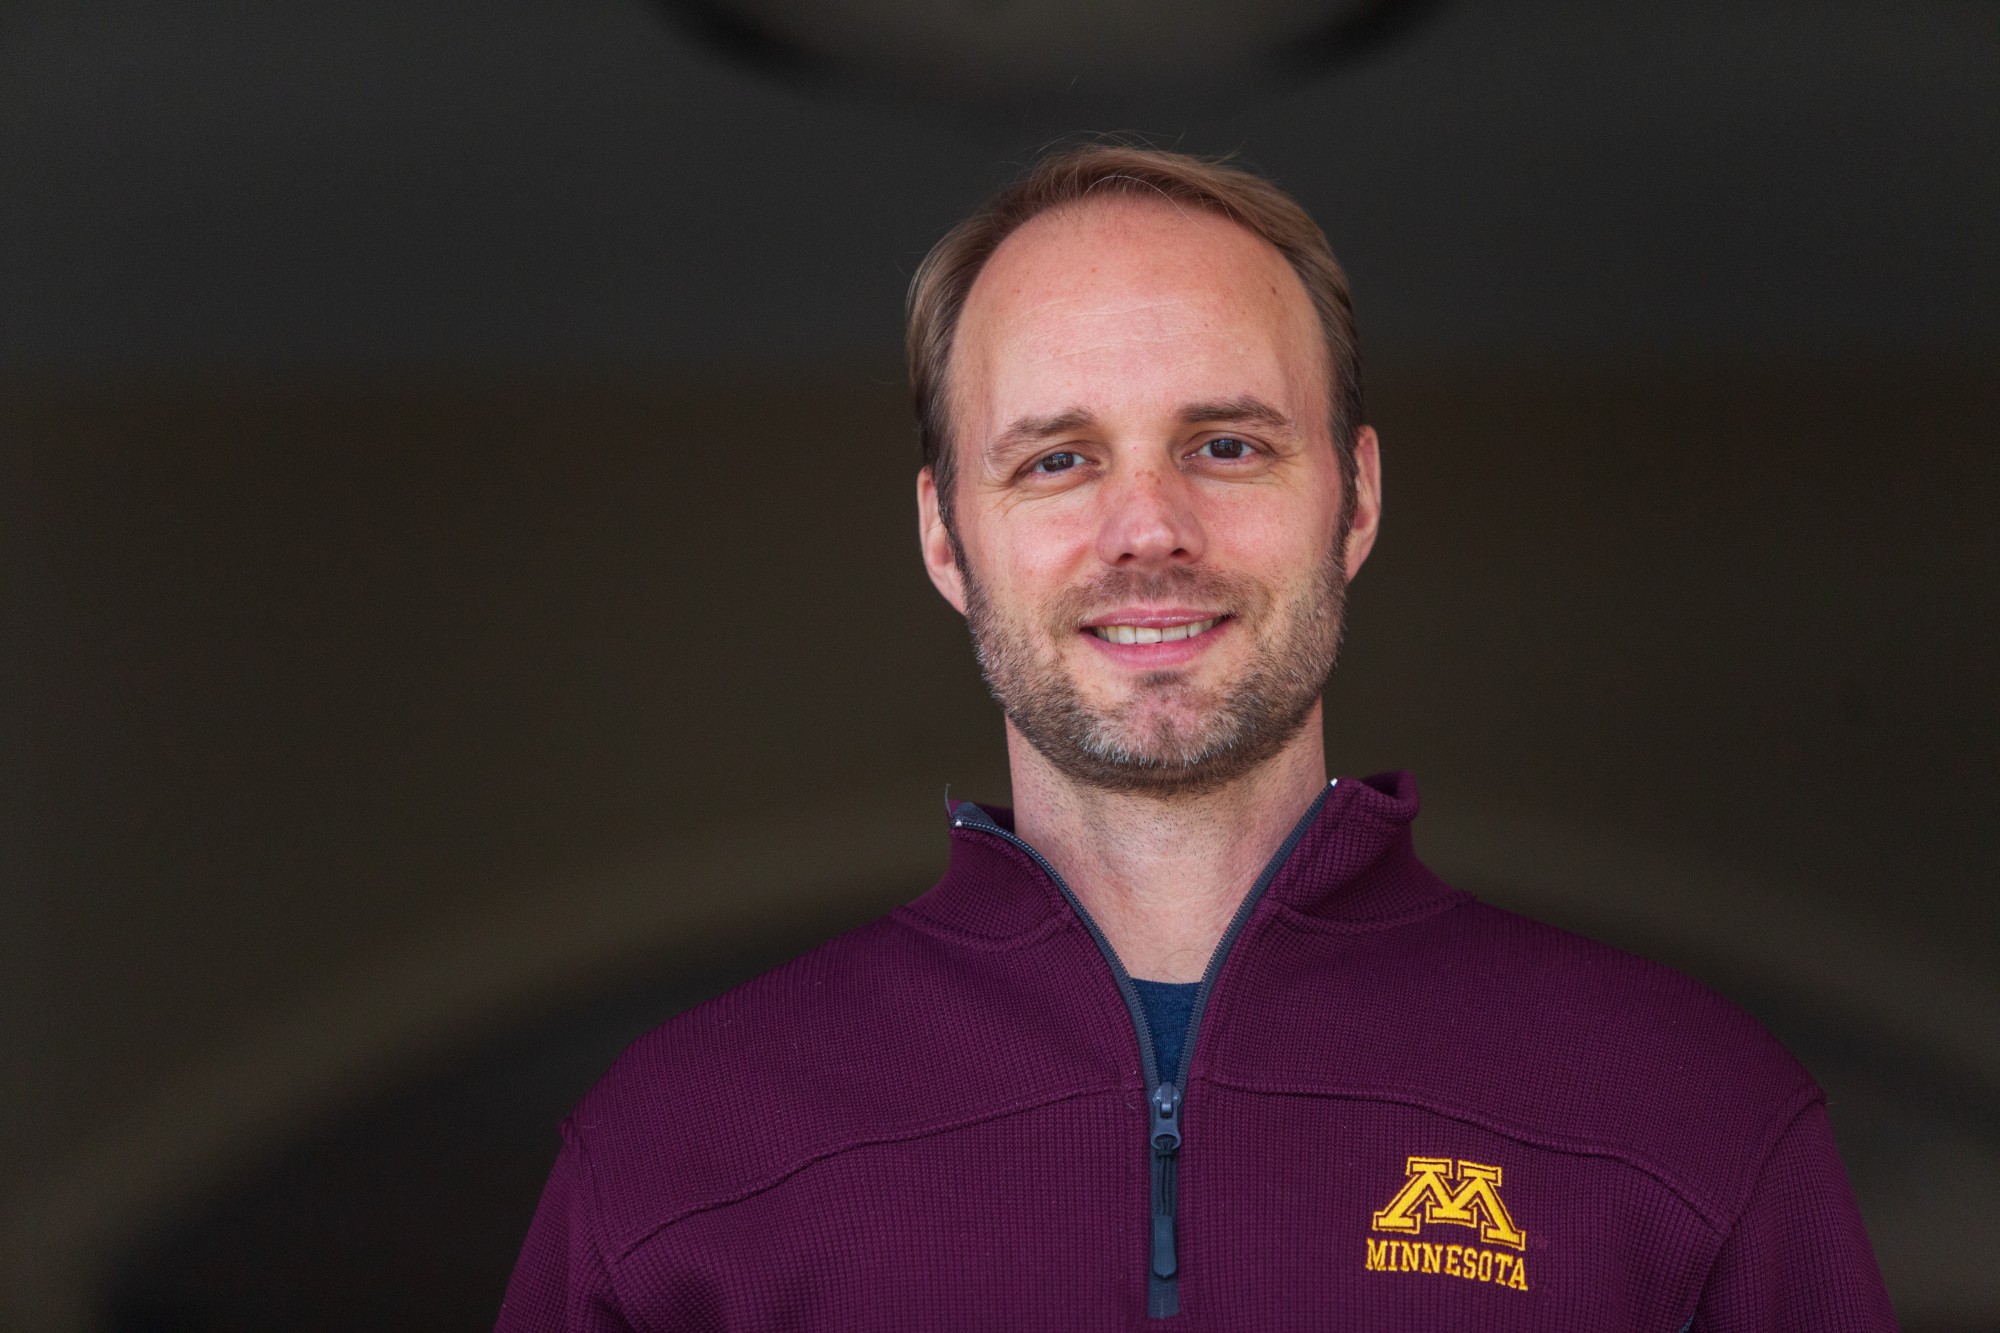 Associate Professor of Epidemiology Ryan Demmer, PhD., poses for a portrait in his home on Friday, April 10. Demmer is leading a research effort aimed at collecting data on asymptomatic infection rates of COVID-19 among Twin-Cities healthcare workers.